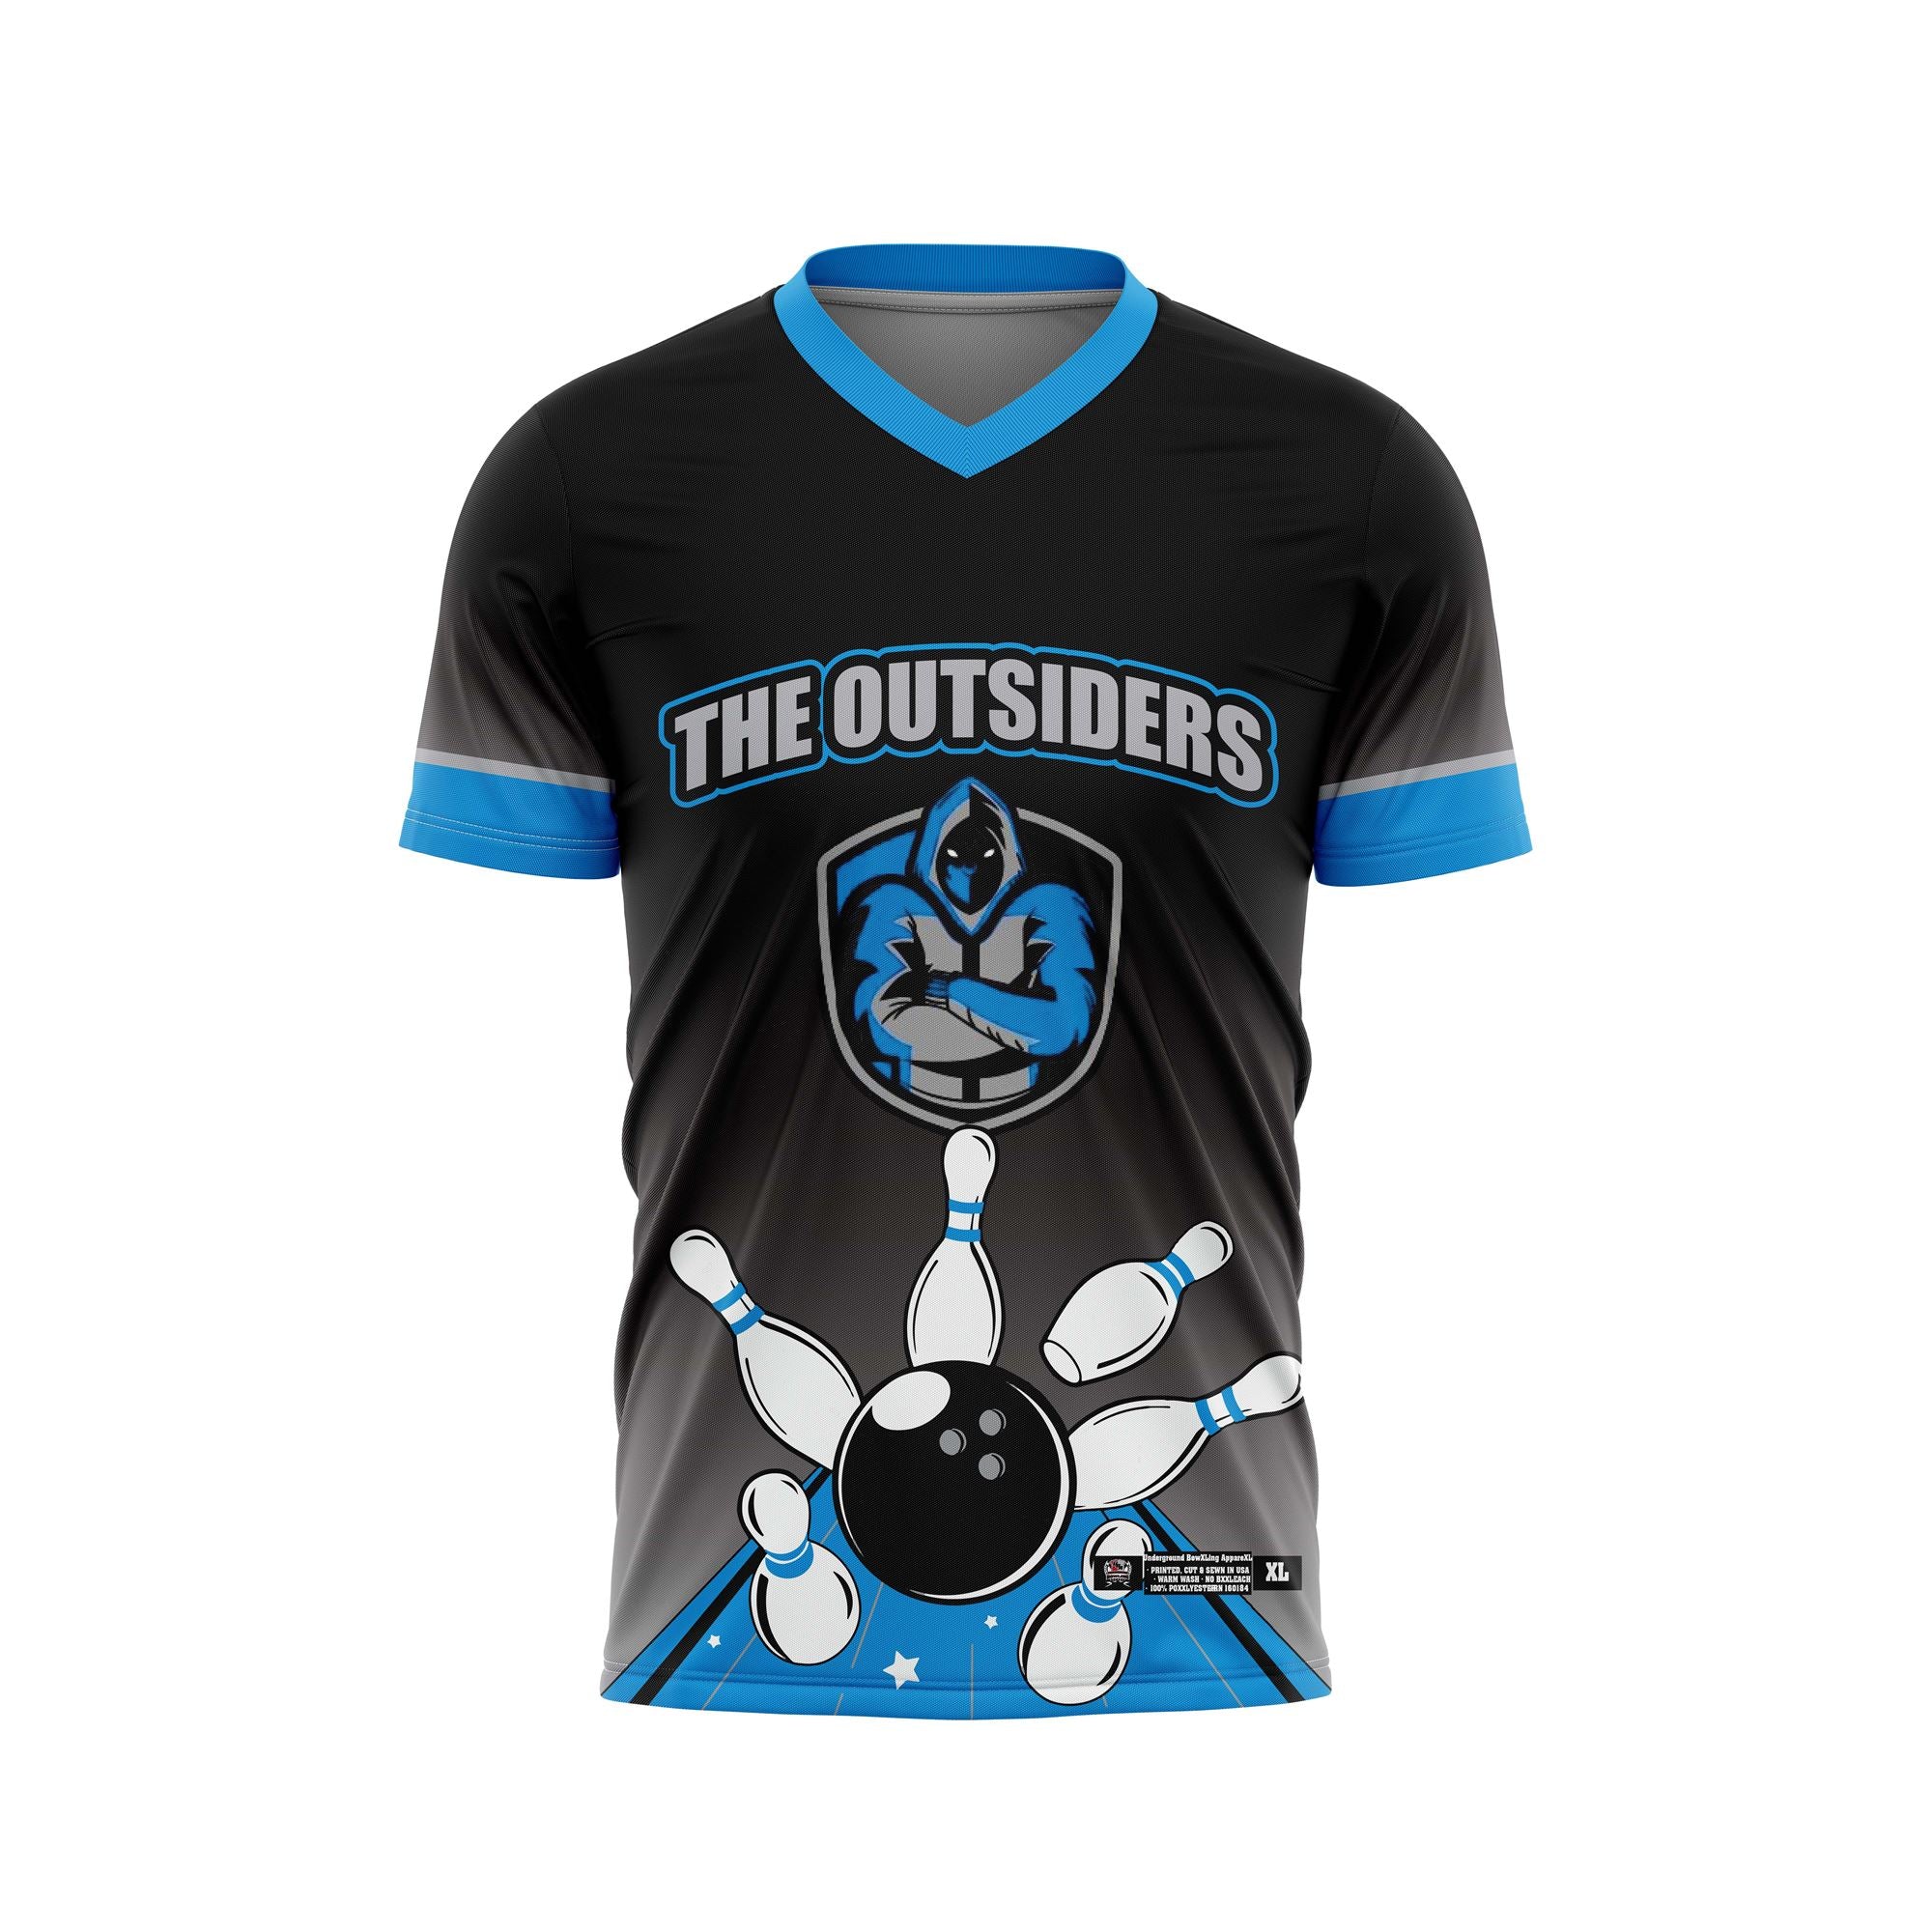 The Outsiders Home / Main Jersey